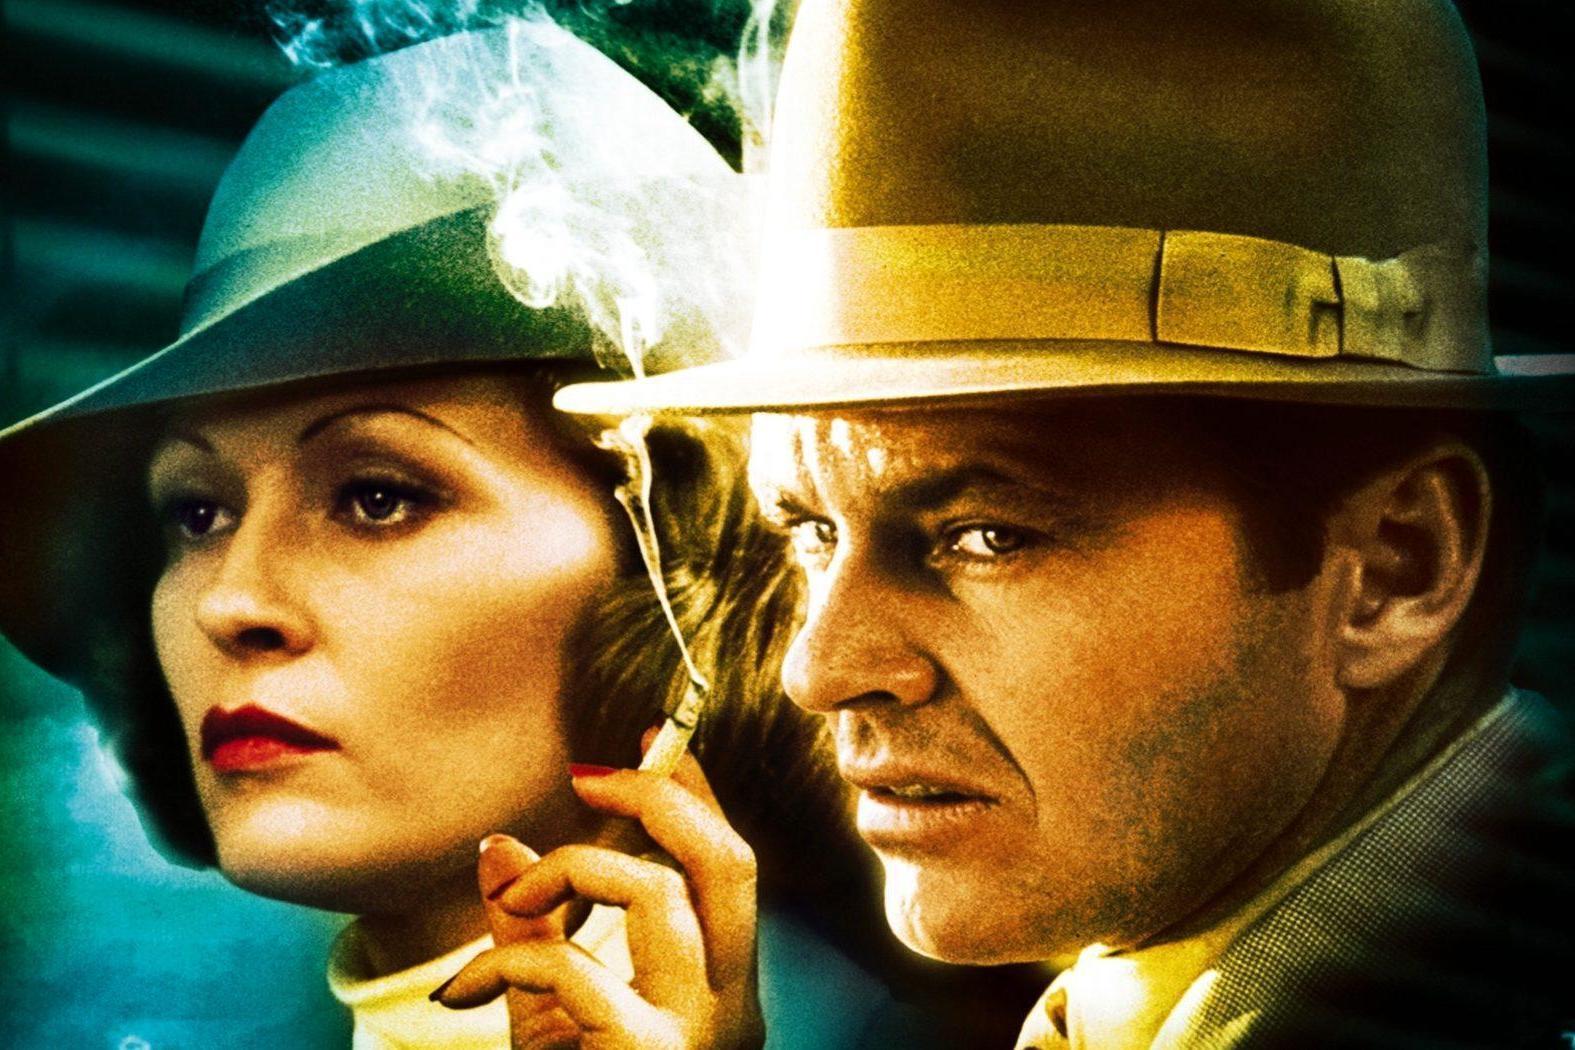 The 10 best neo-noir films of all time: From Chinatown to LA